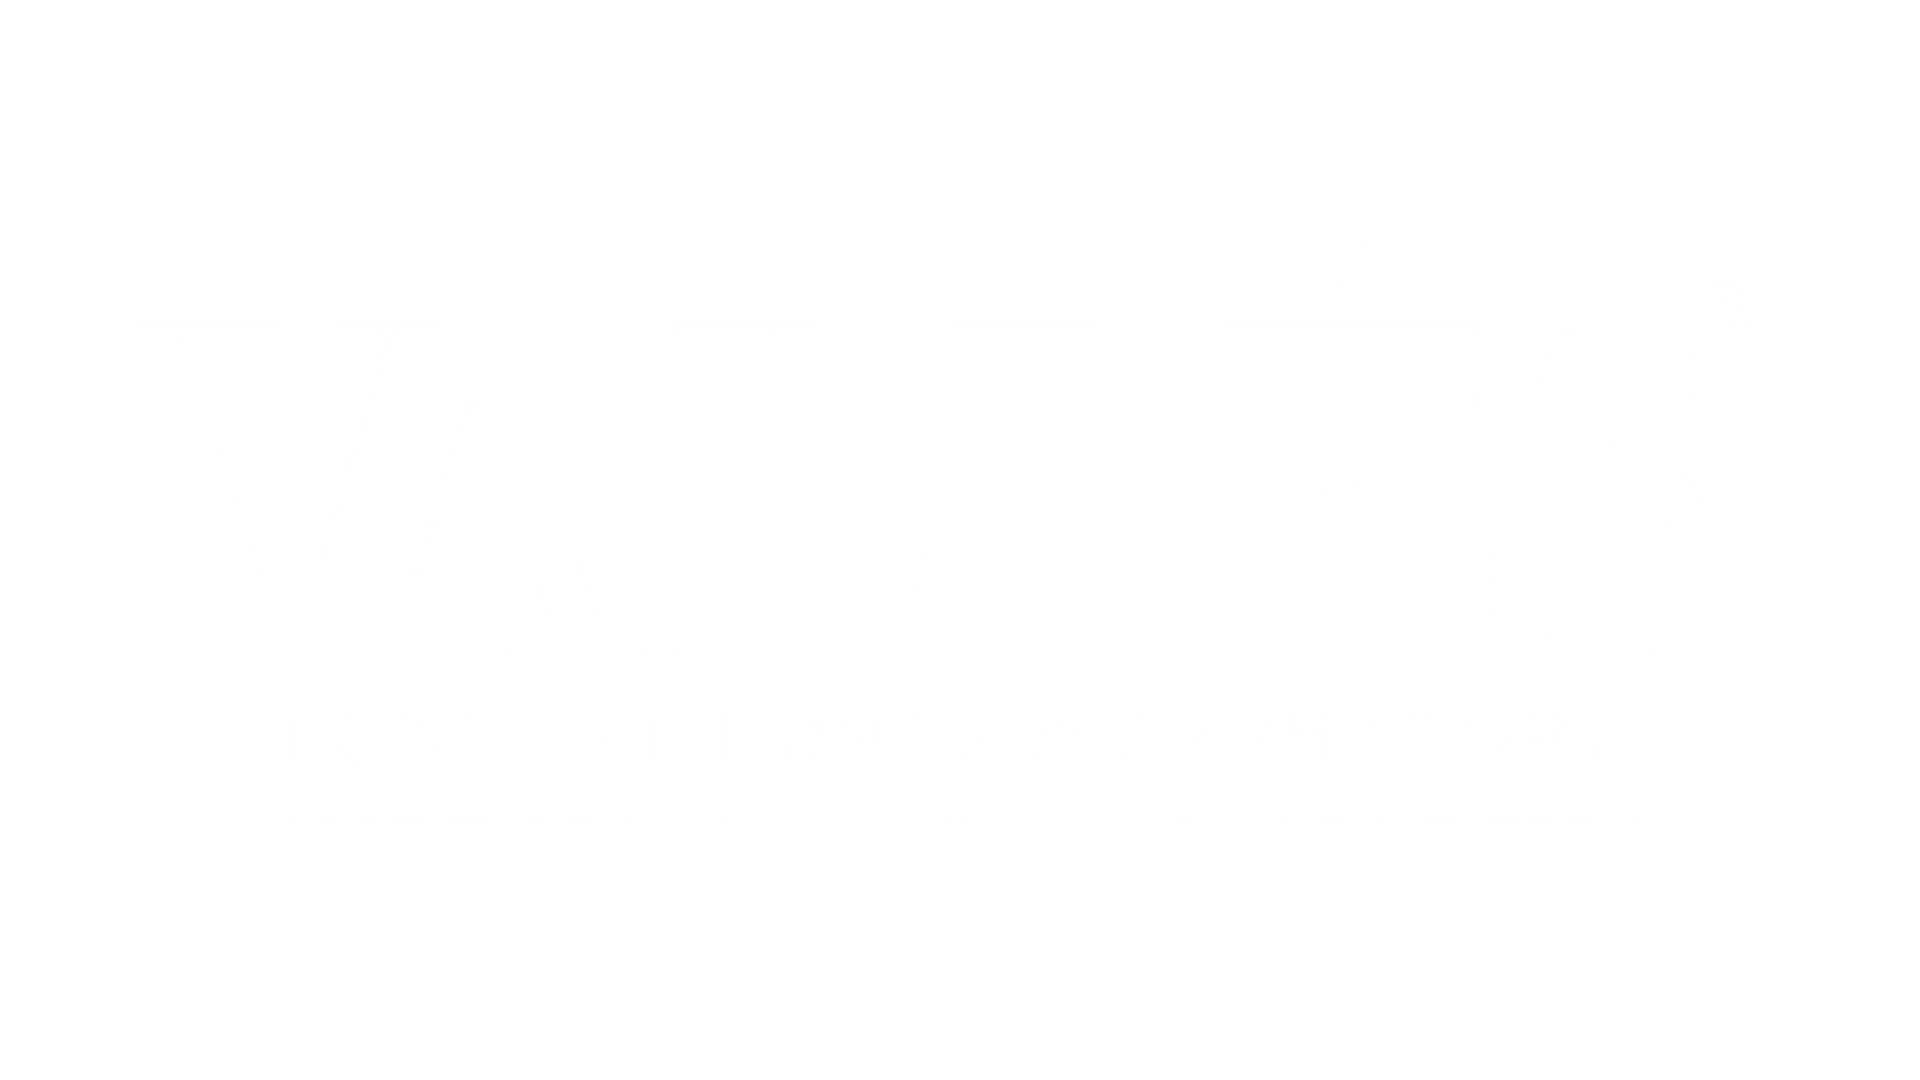 Vallés Funeral Homes & Crematory